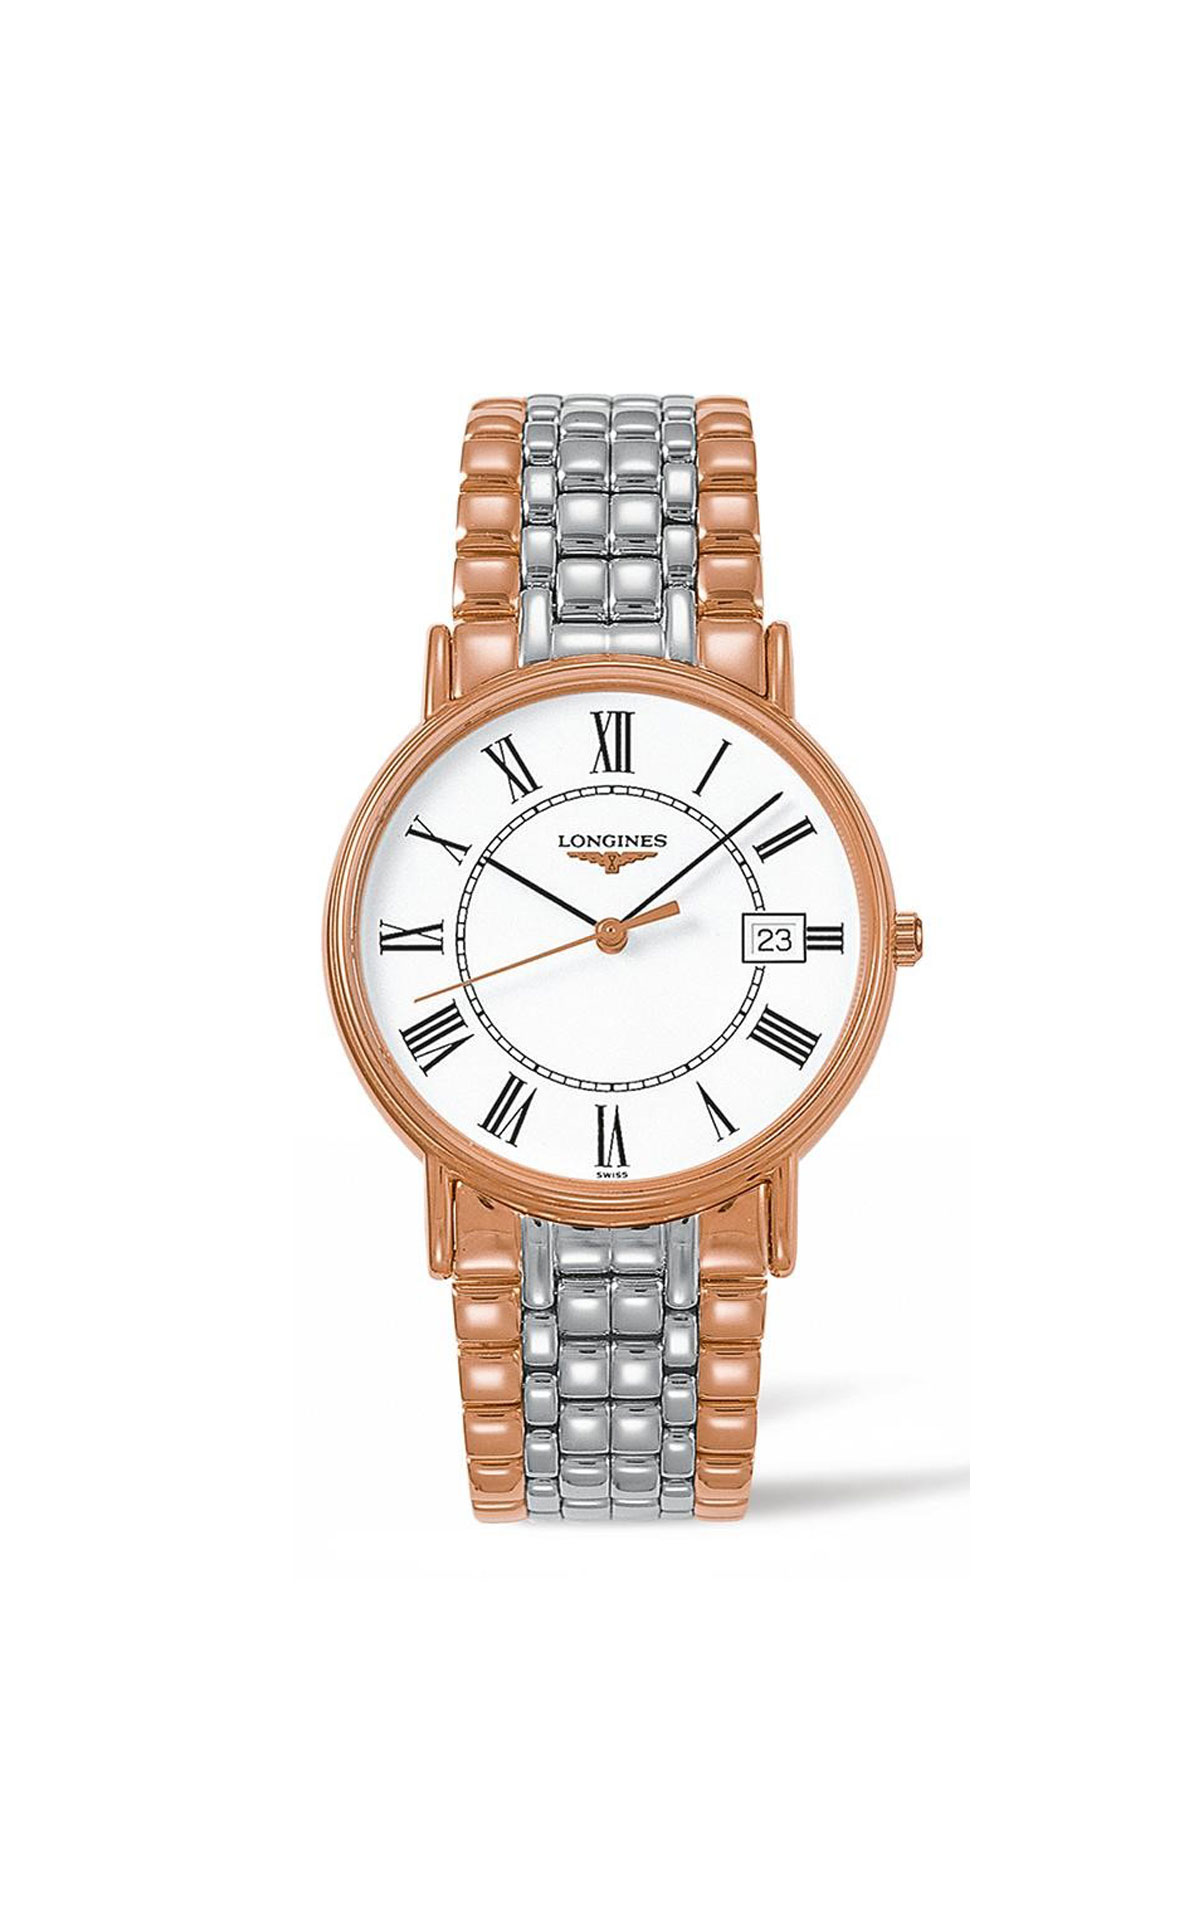 Hour Passion Longines Présence Gents Watch from Bicester Village